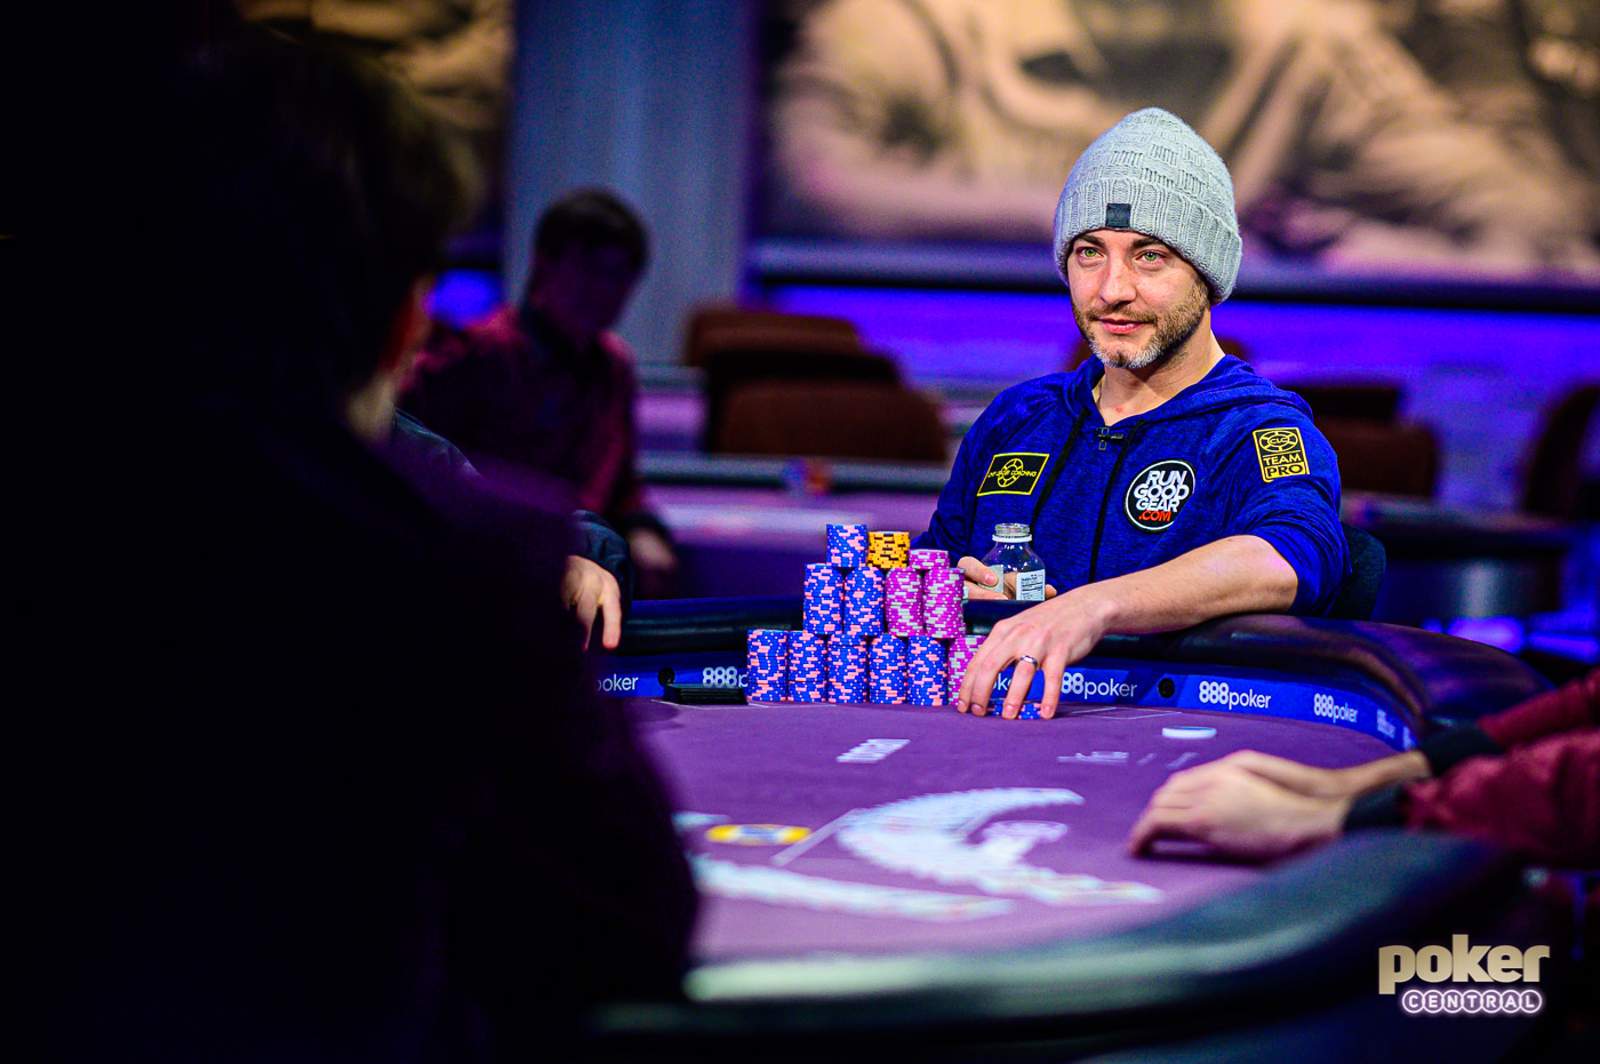 It's Chance Kornuth's Purple Jacket to Lose at the 2019 Poker Masters